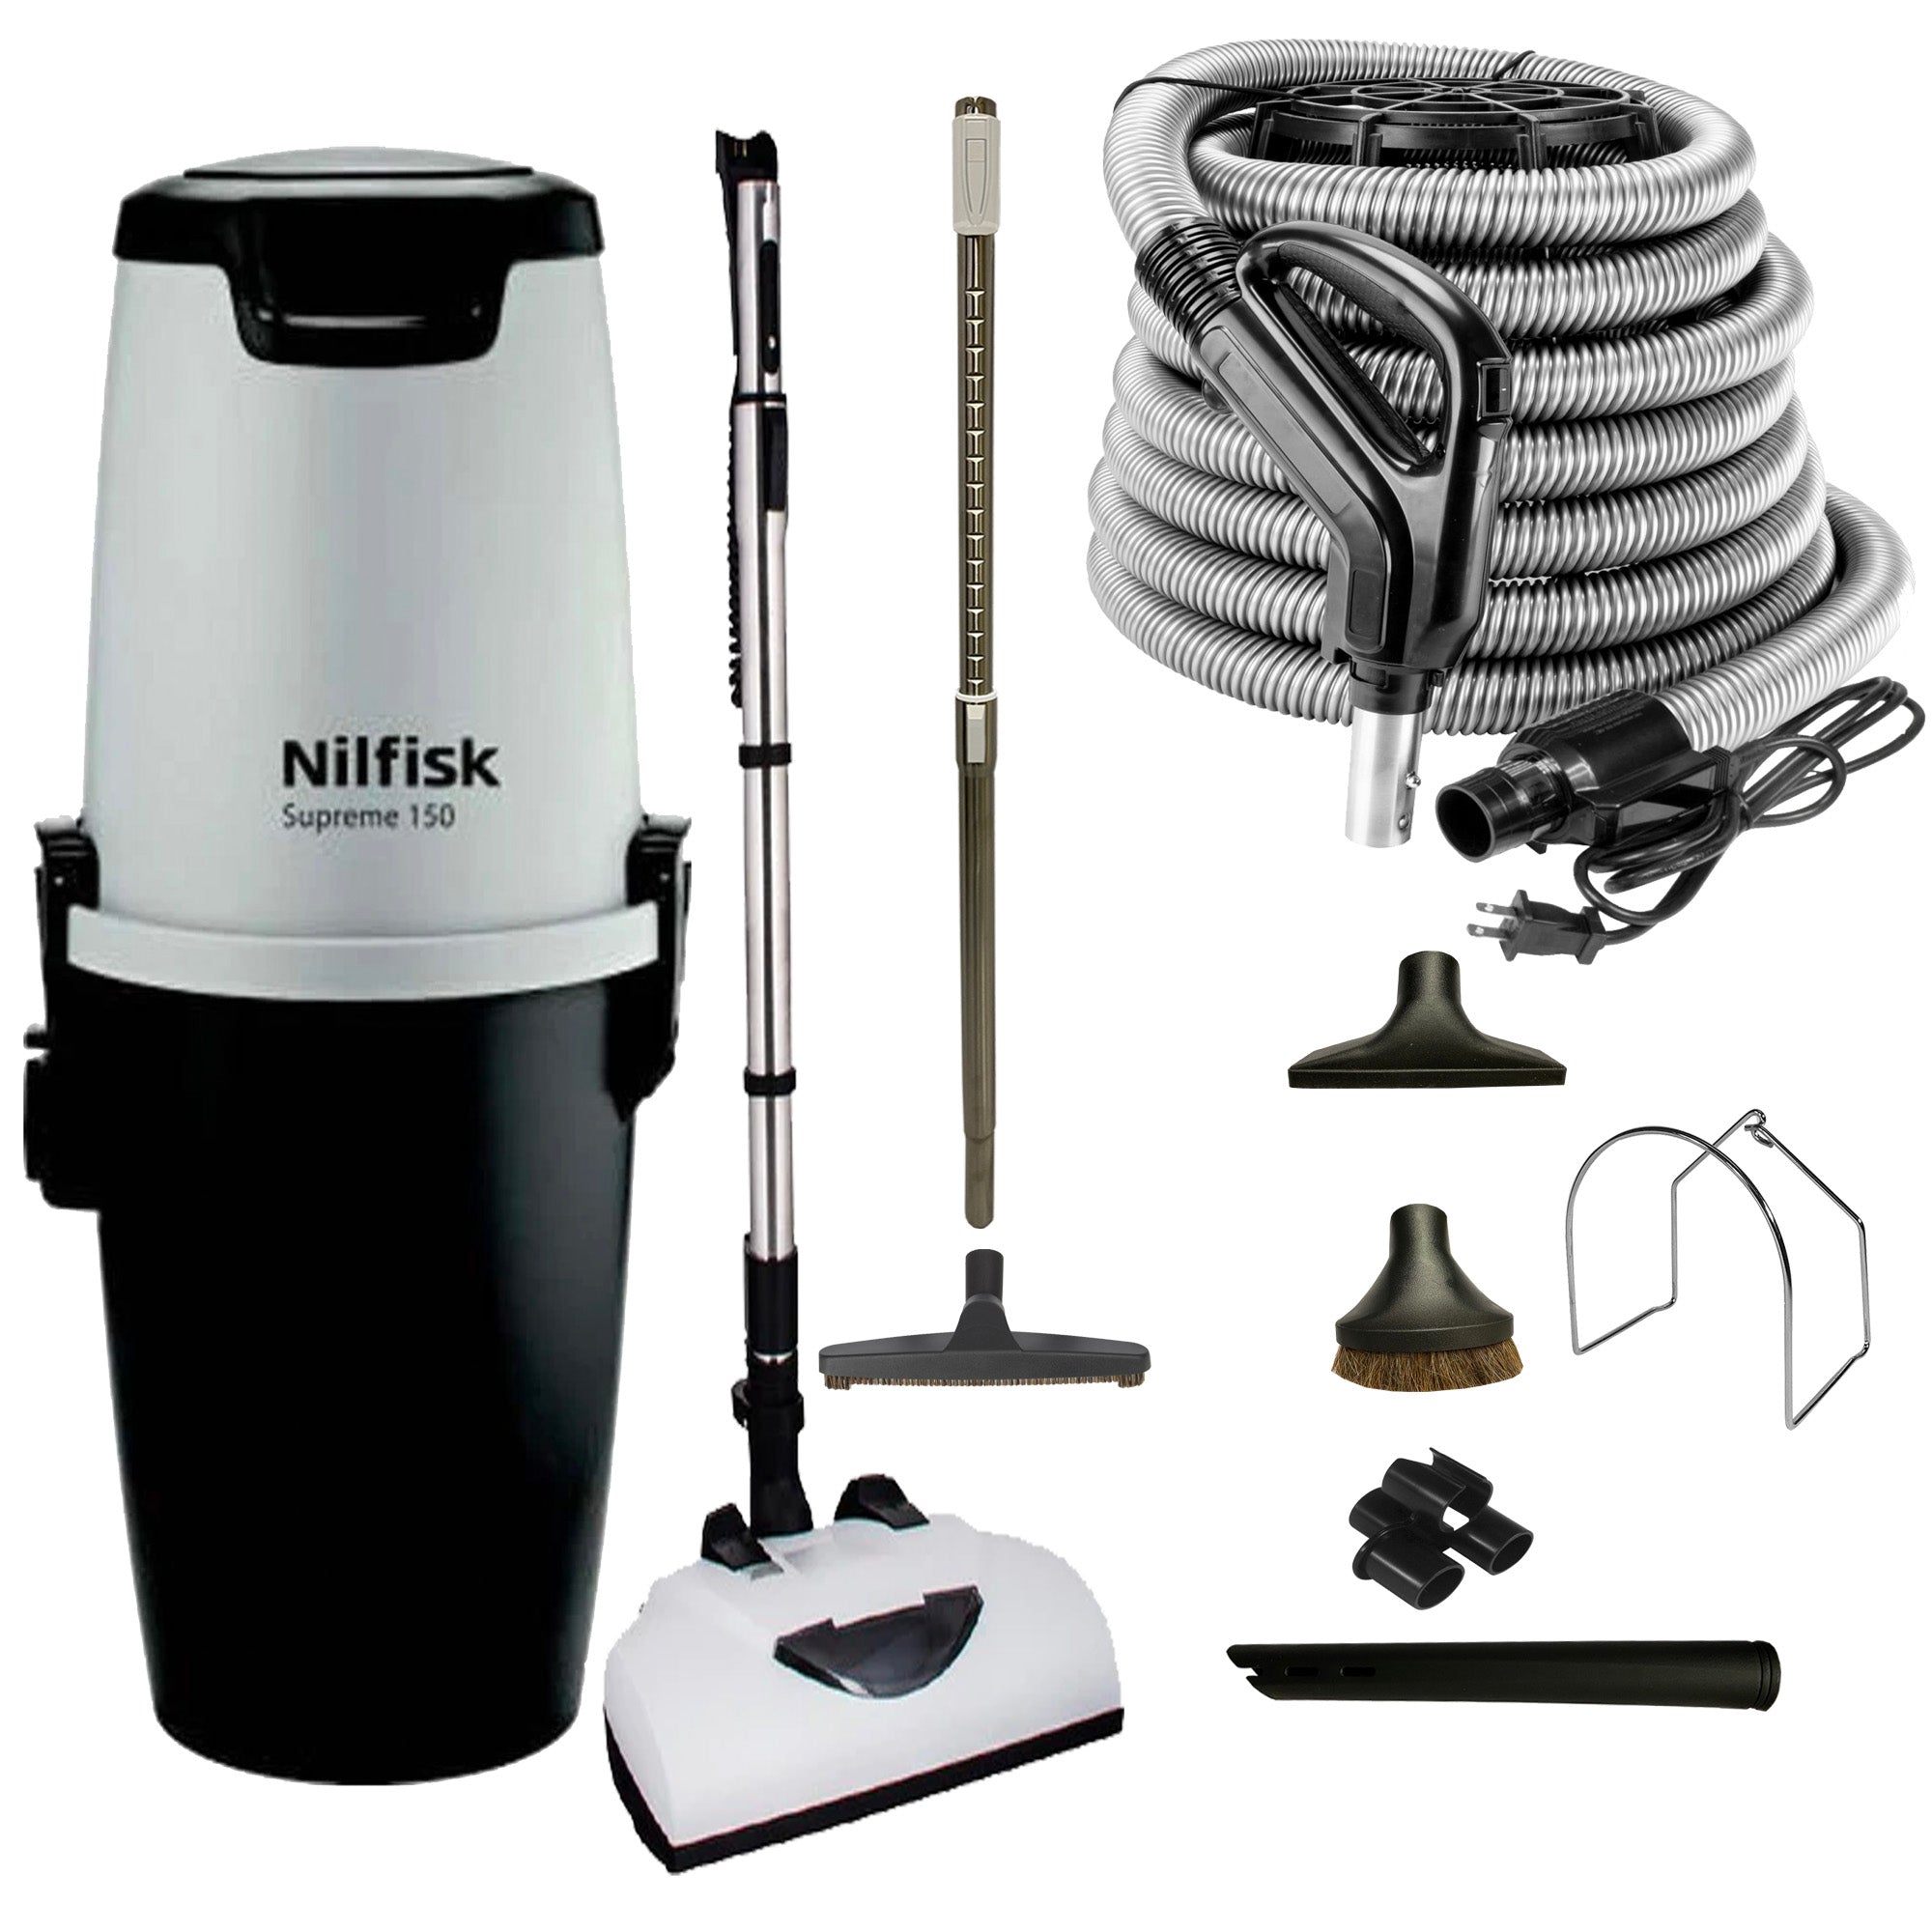 Nilfisk Supreme 150 Central Vacuum with Deluxe Electric Package - Black